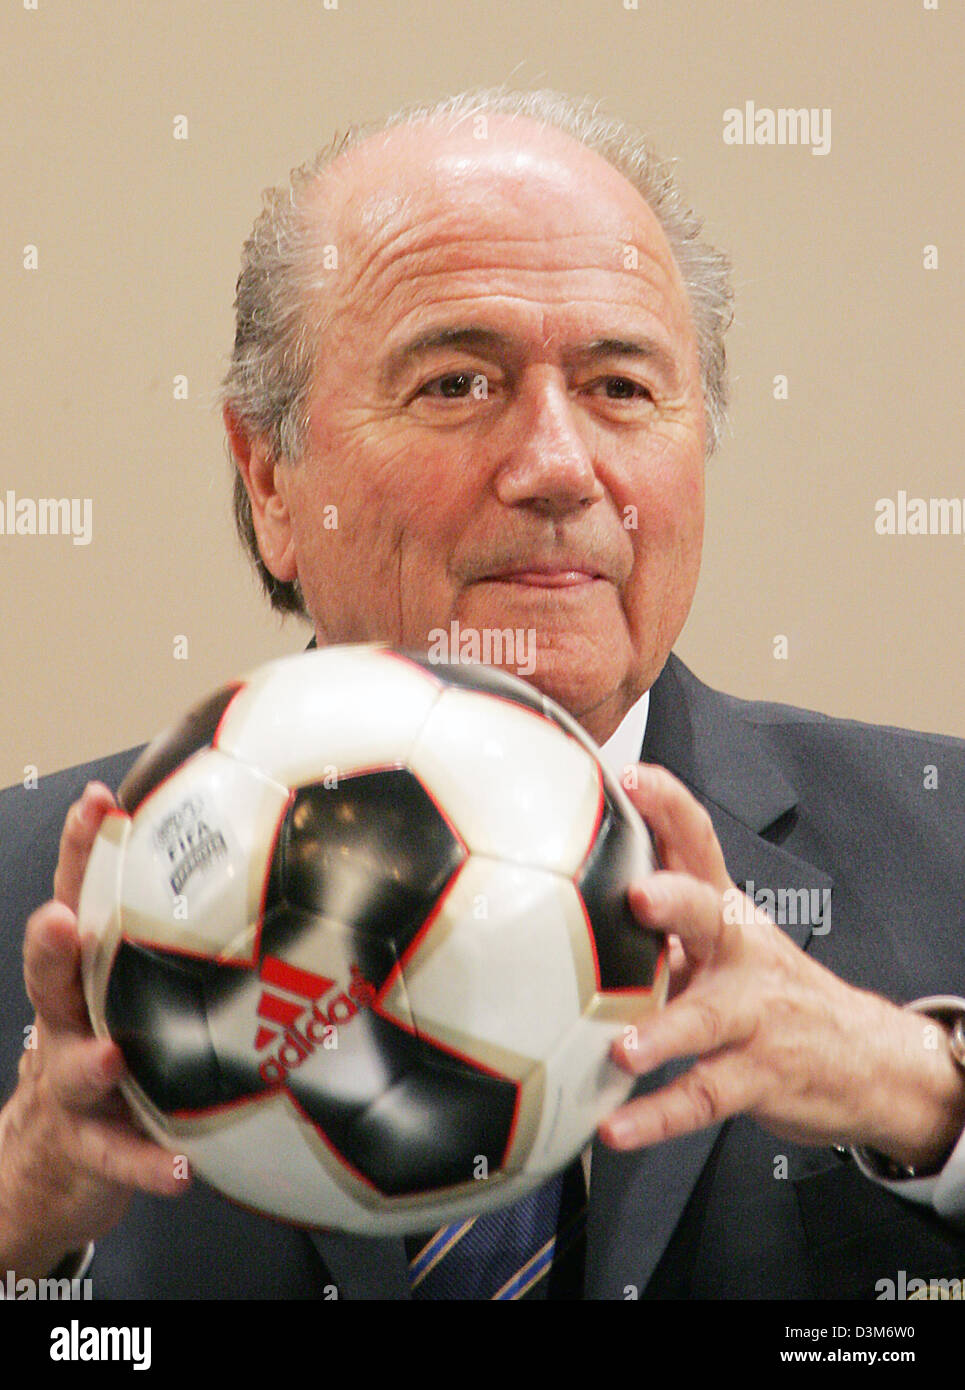 (dpa) - Joseph Blatter, President of FIFA, holds a soccer ball in his hands after a press conference at the fair centre in Leipzig, Germany, Wednesday, 07 December 2005. The preparations for the 2006 World Cup final round draw, on Friday, 09 December 2005, are in full swing. Around 4,000 invited guest, including 1,500 journalists, are expected to attend the event in Leipzig. Photo: Stock Photo